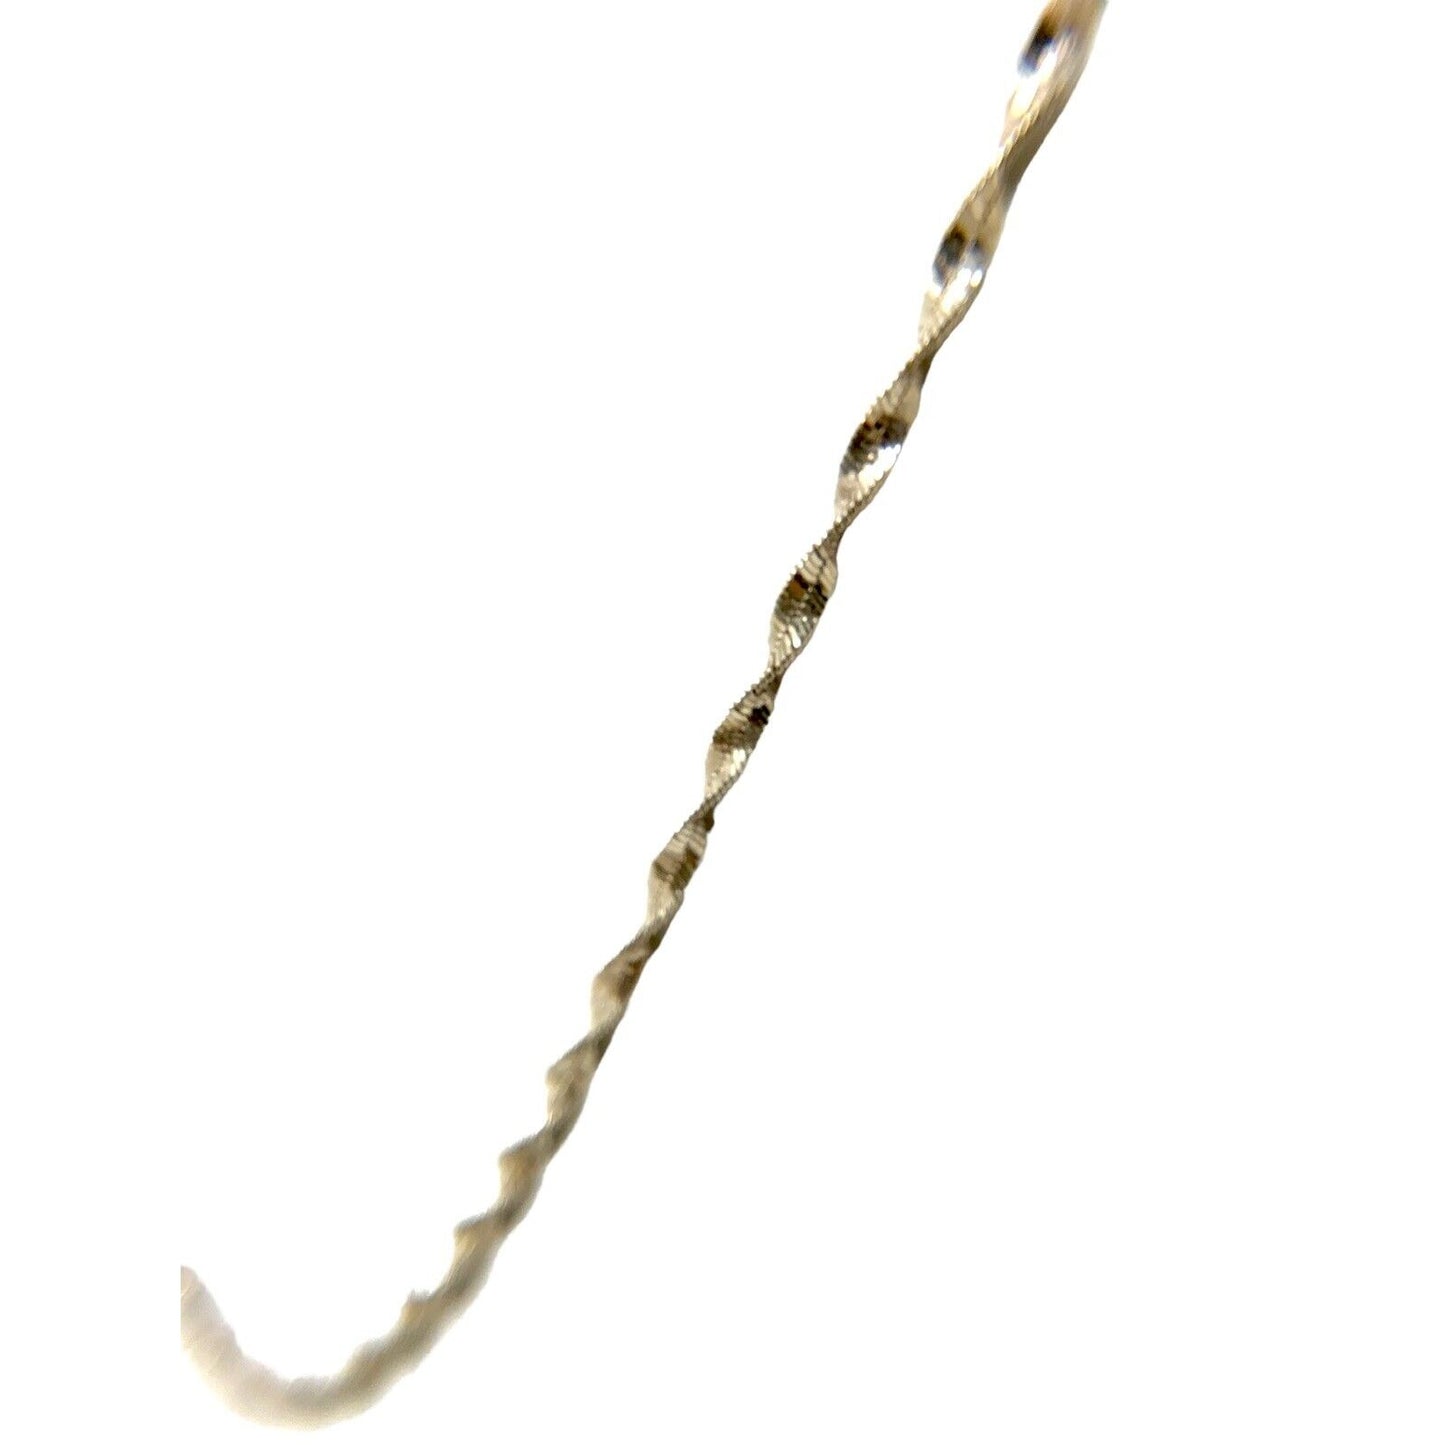 Sterling Silver Twisted Rope Necklace Chain - 18"